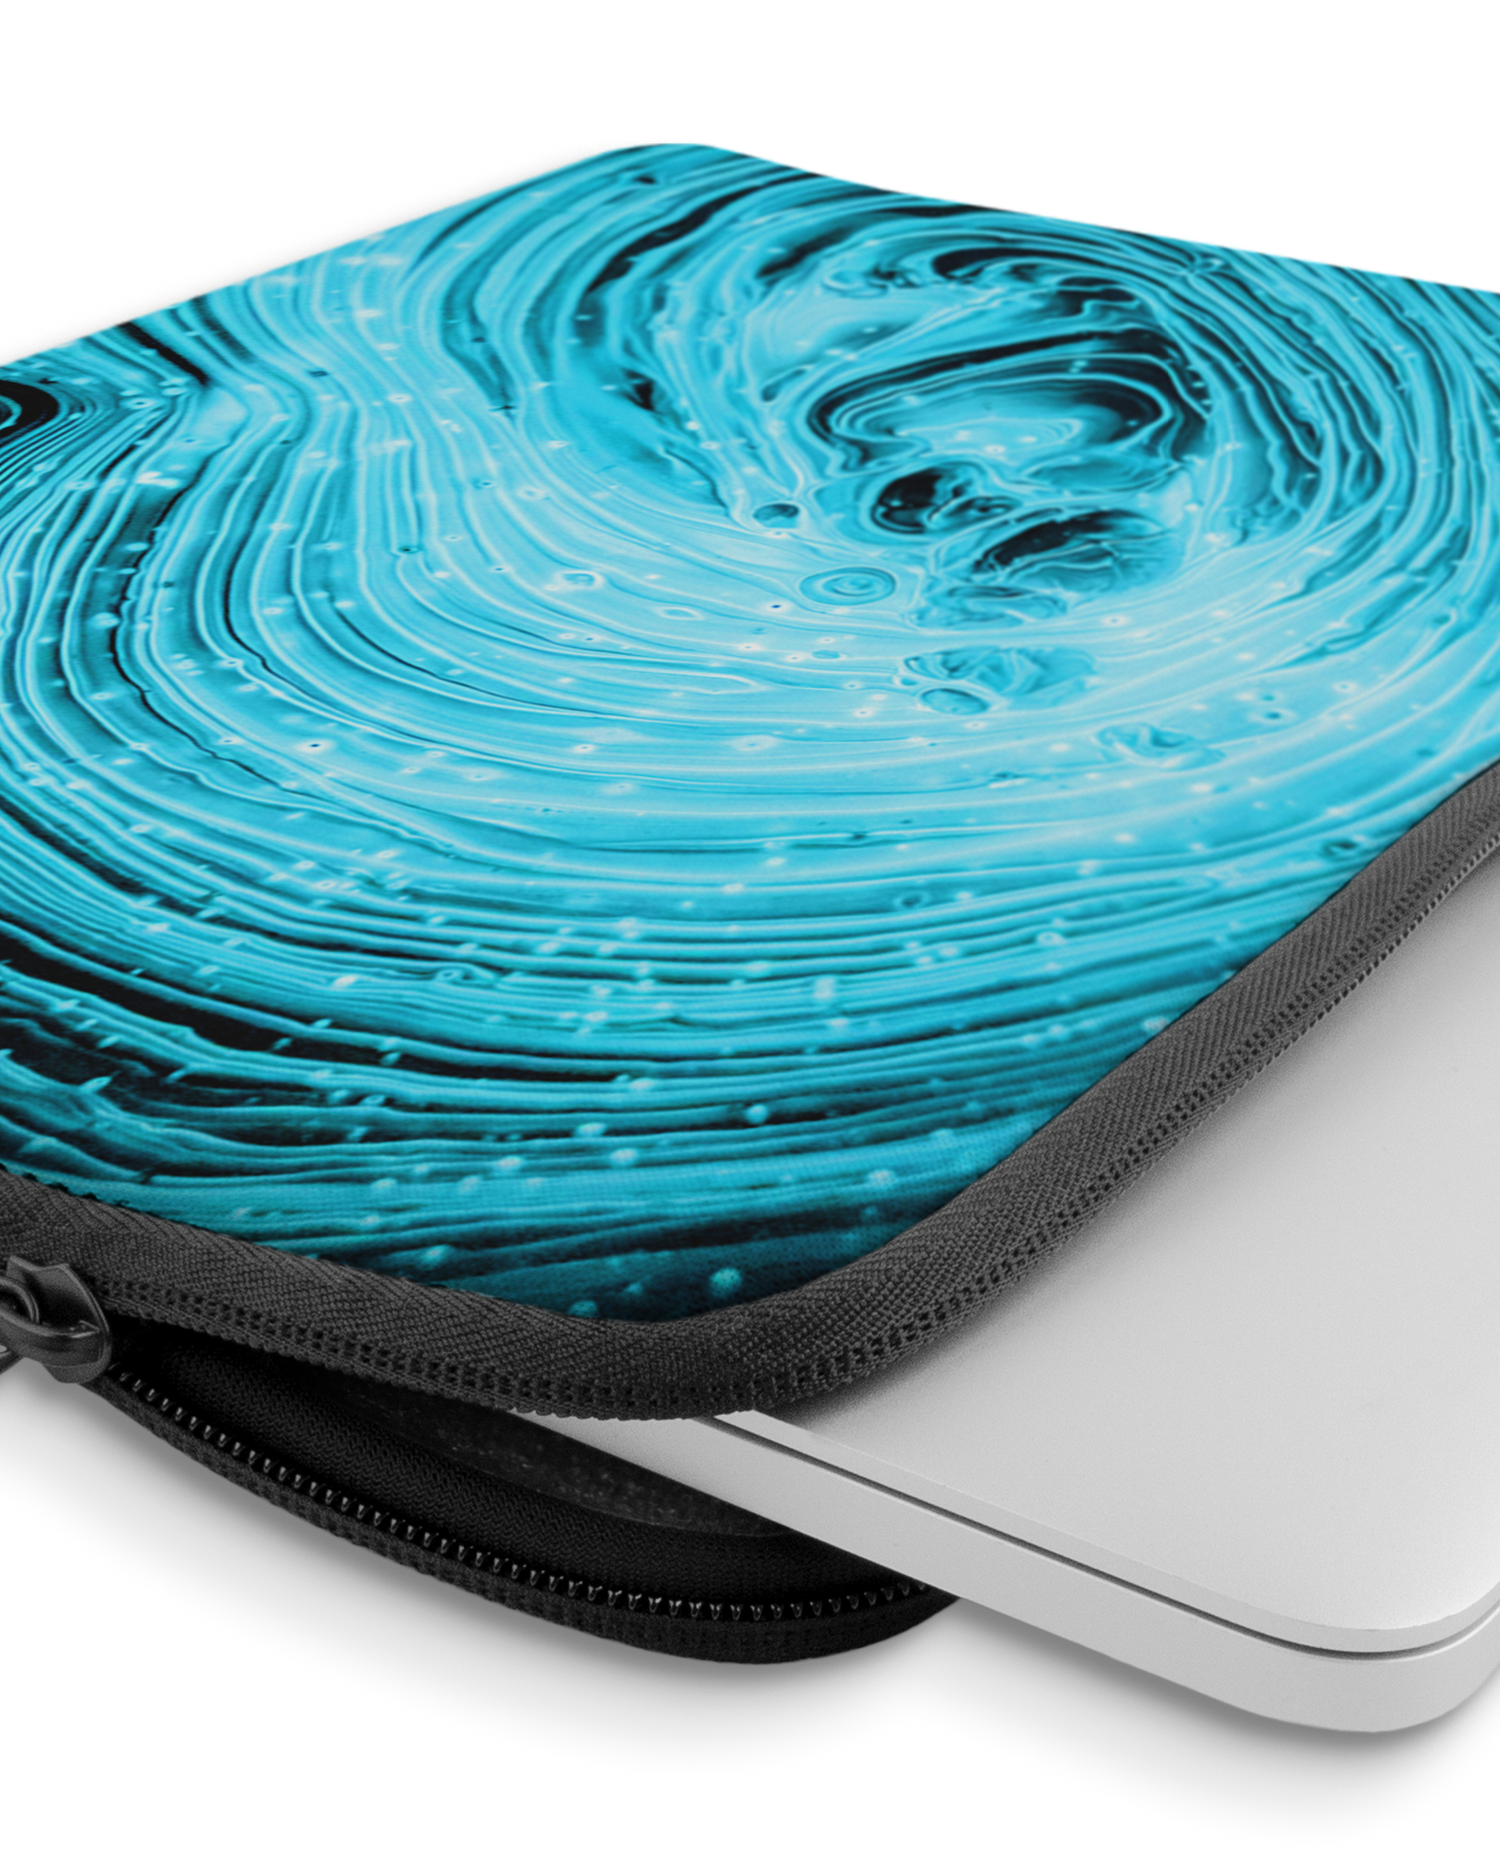 Turquoise Ripples Laptop Case 13-14 inch with device inside